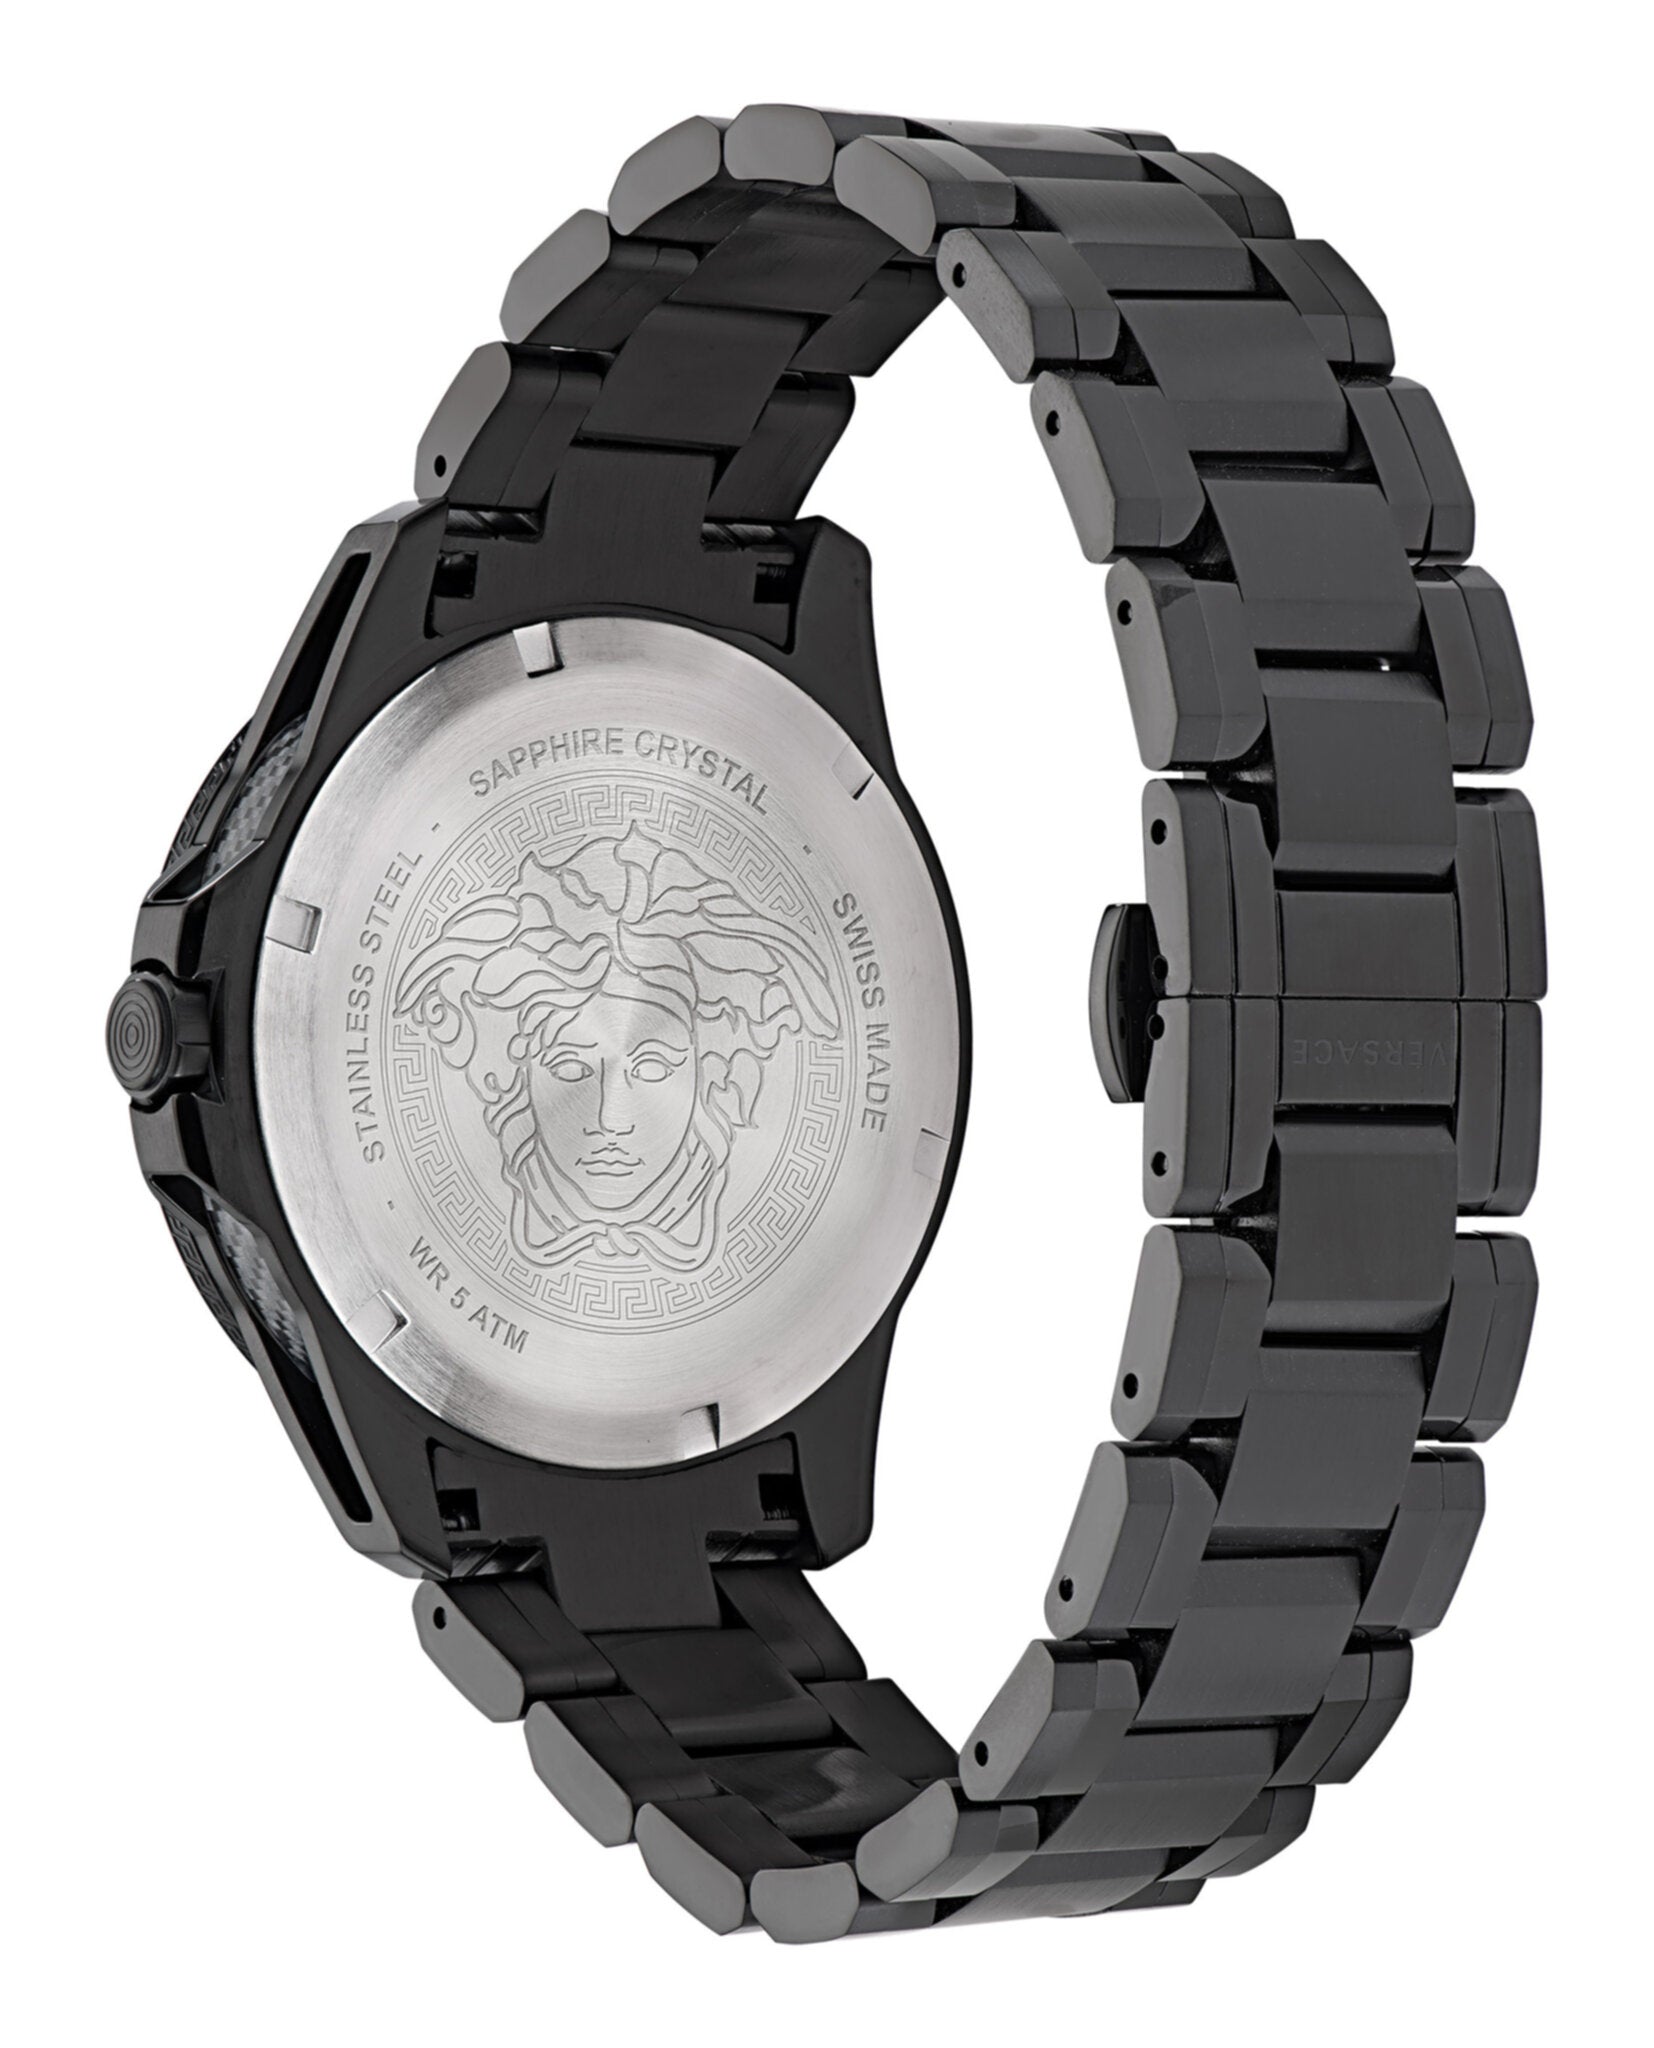 Mens GMT Sport Watches – Tech Versace MadaLuxe Time Madaluxe Time |